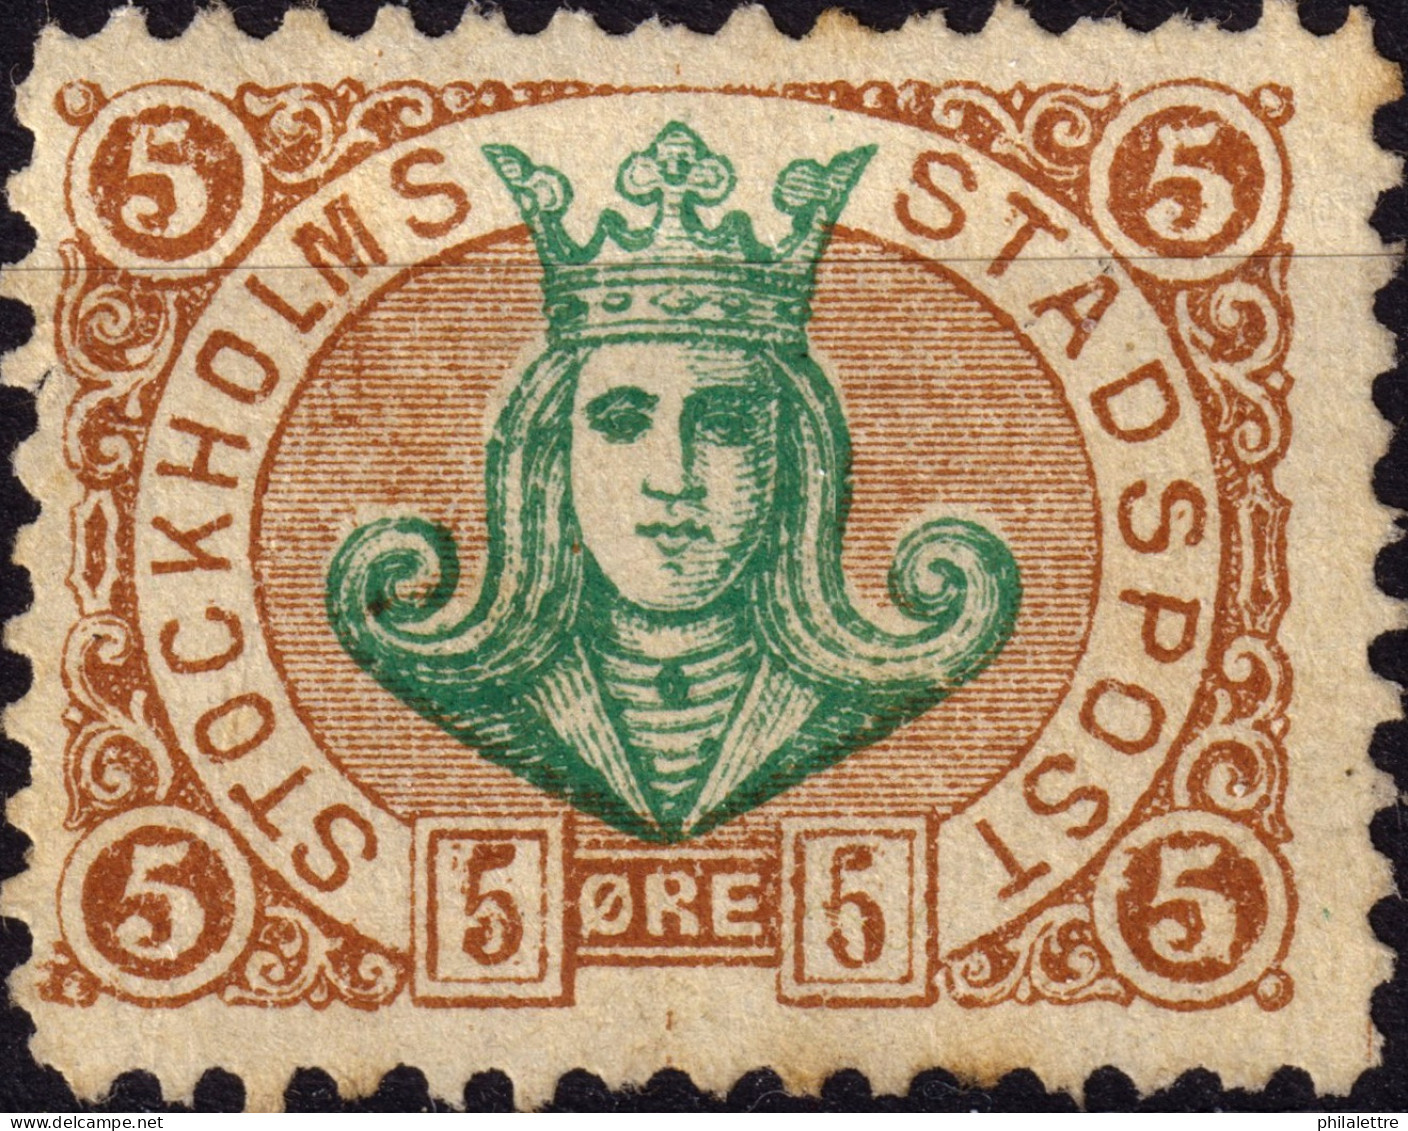 SUÈDE / SWEDEN - Local Post STOCKHOLM 5øre Green & Yell.-brown (1887 Danish Spelling) - No Gum - Local Post Stamps